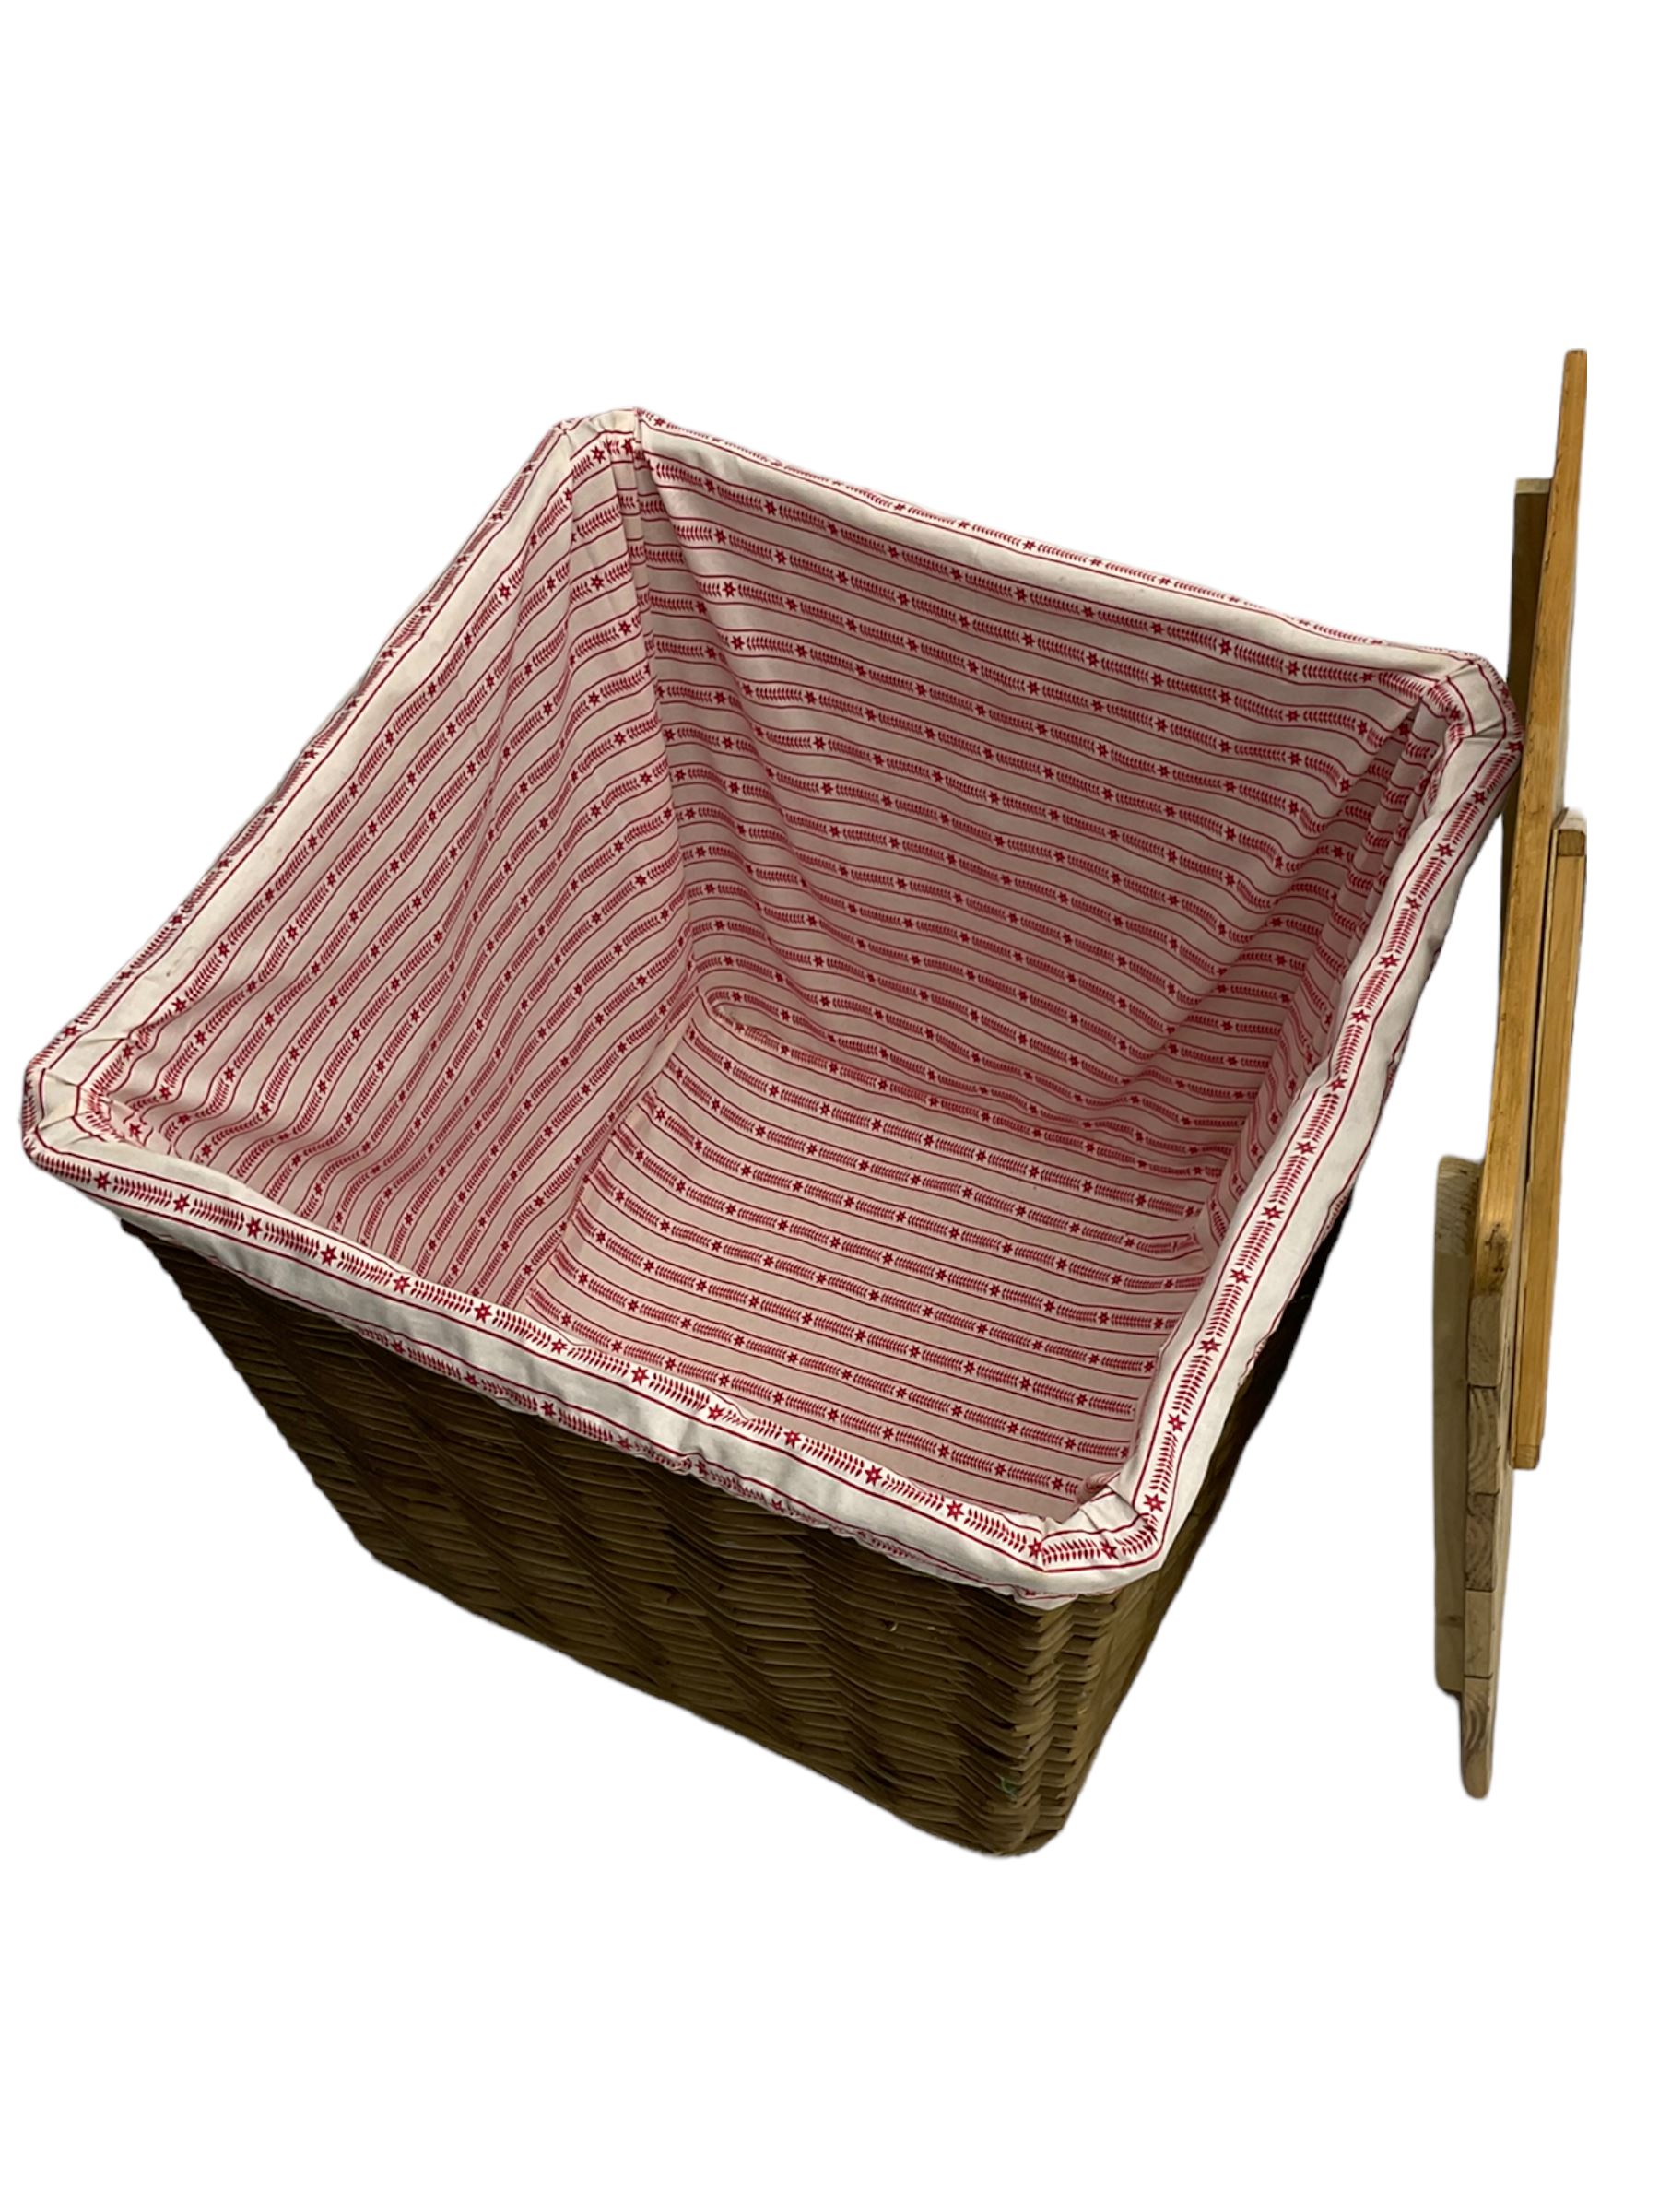 Wicker linen basket with plank Union Jack top - Image 5 of 5